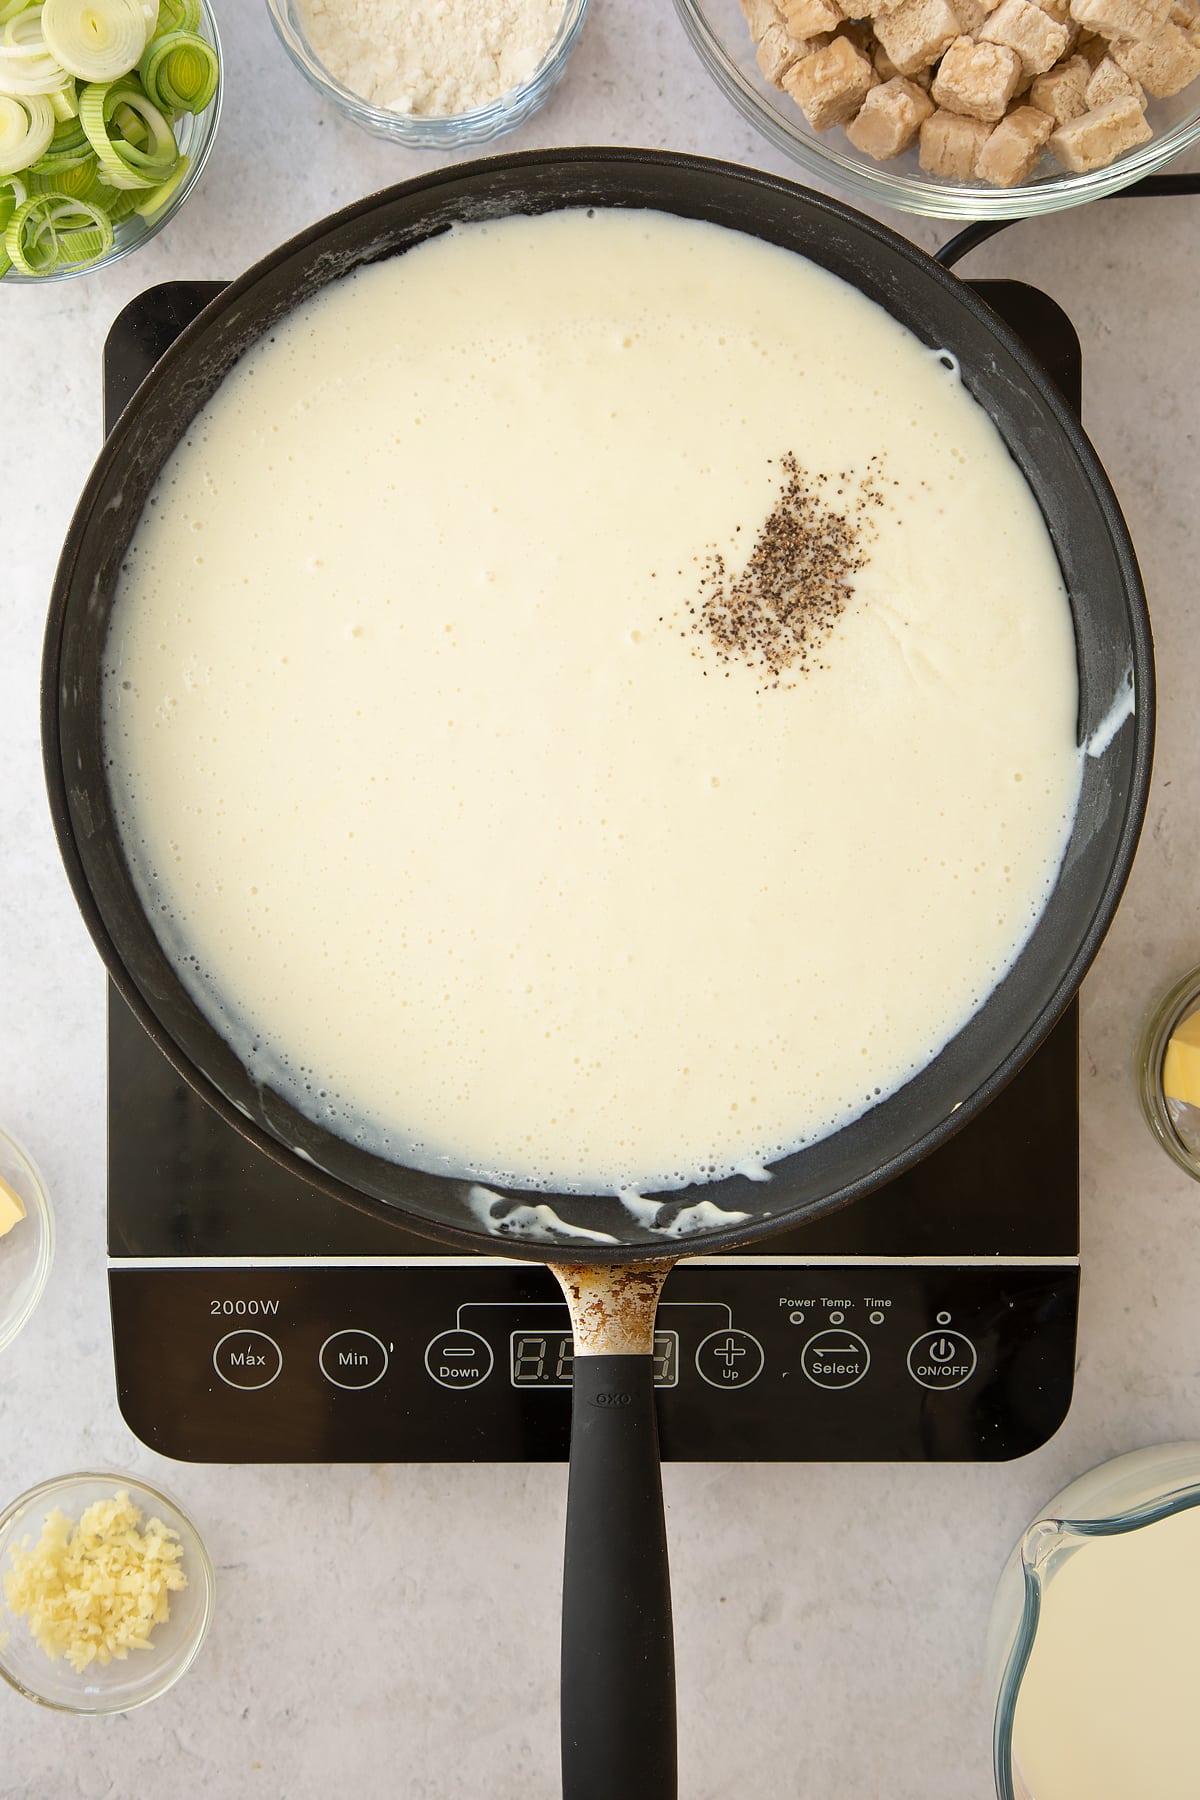 cooked milk and flour mix topped with a dash of pepper in a large frying pan on an induction hob.